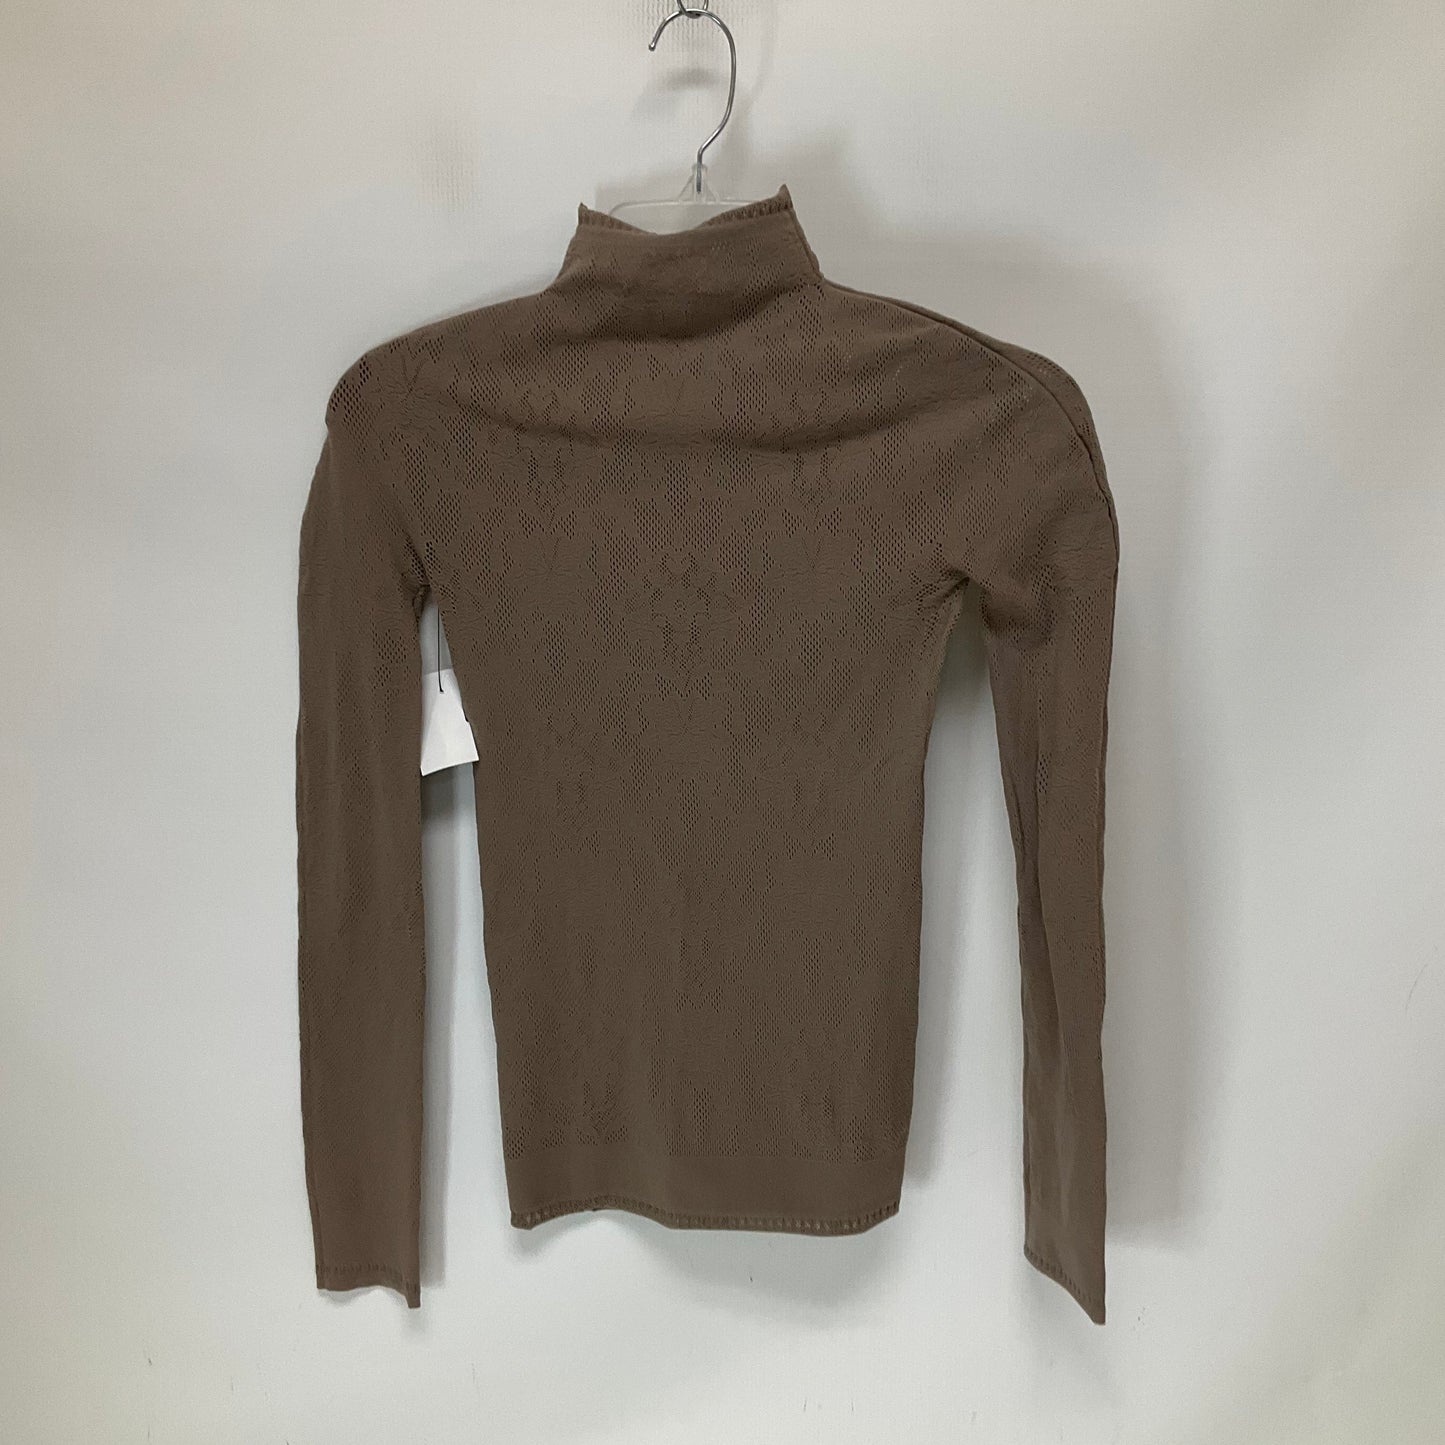 Taupe Top Long Sleeve Free People, Size Xs